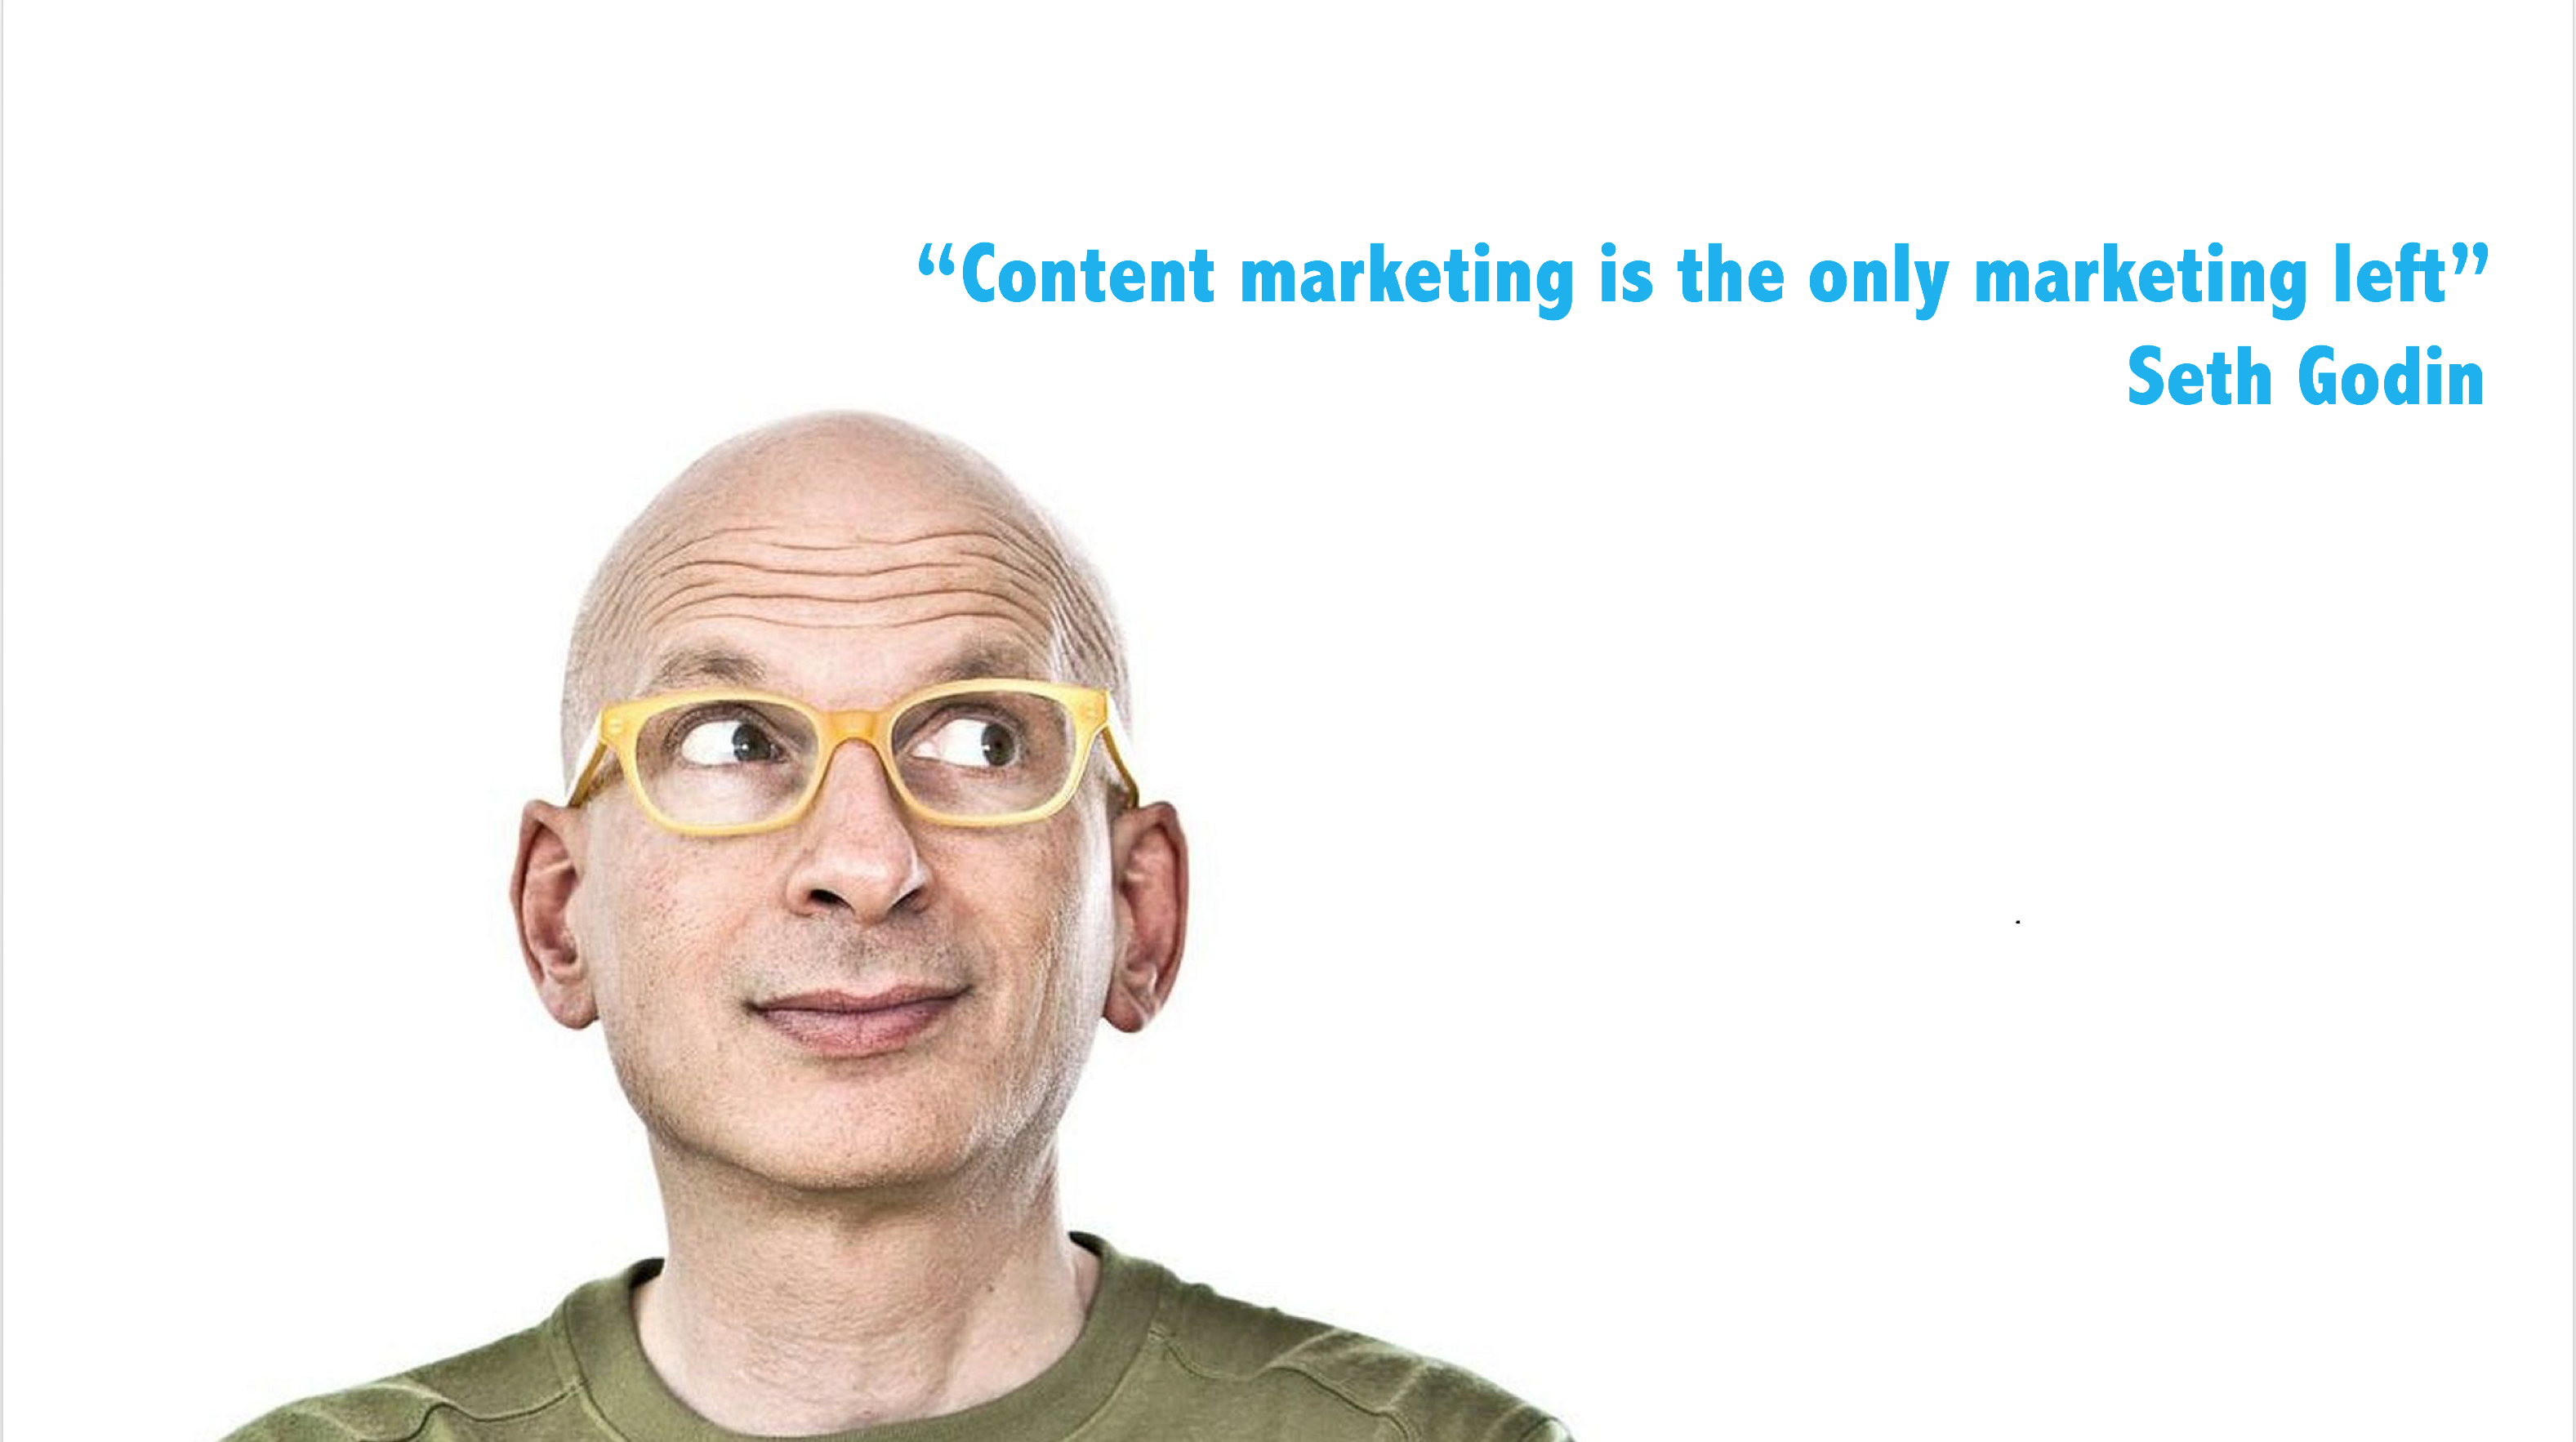 Content marketing is the only marketing left by Seth Godin